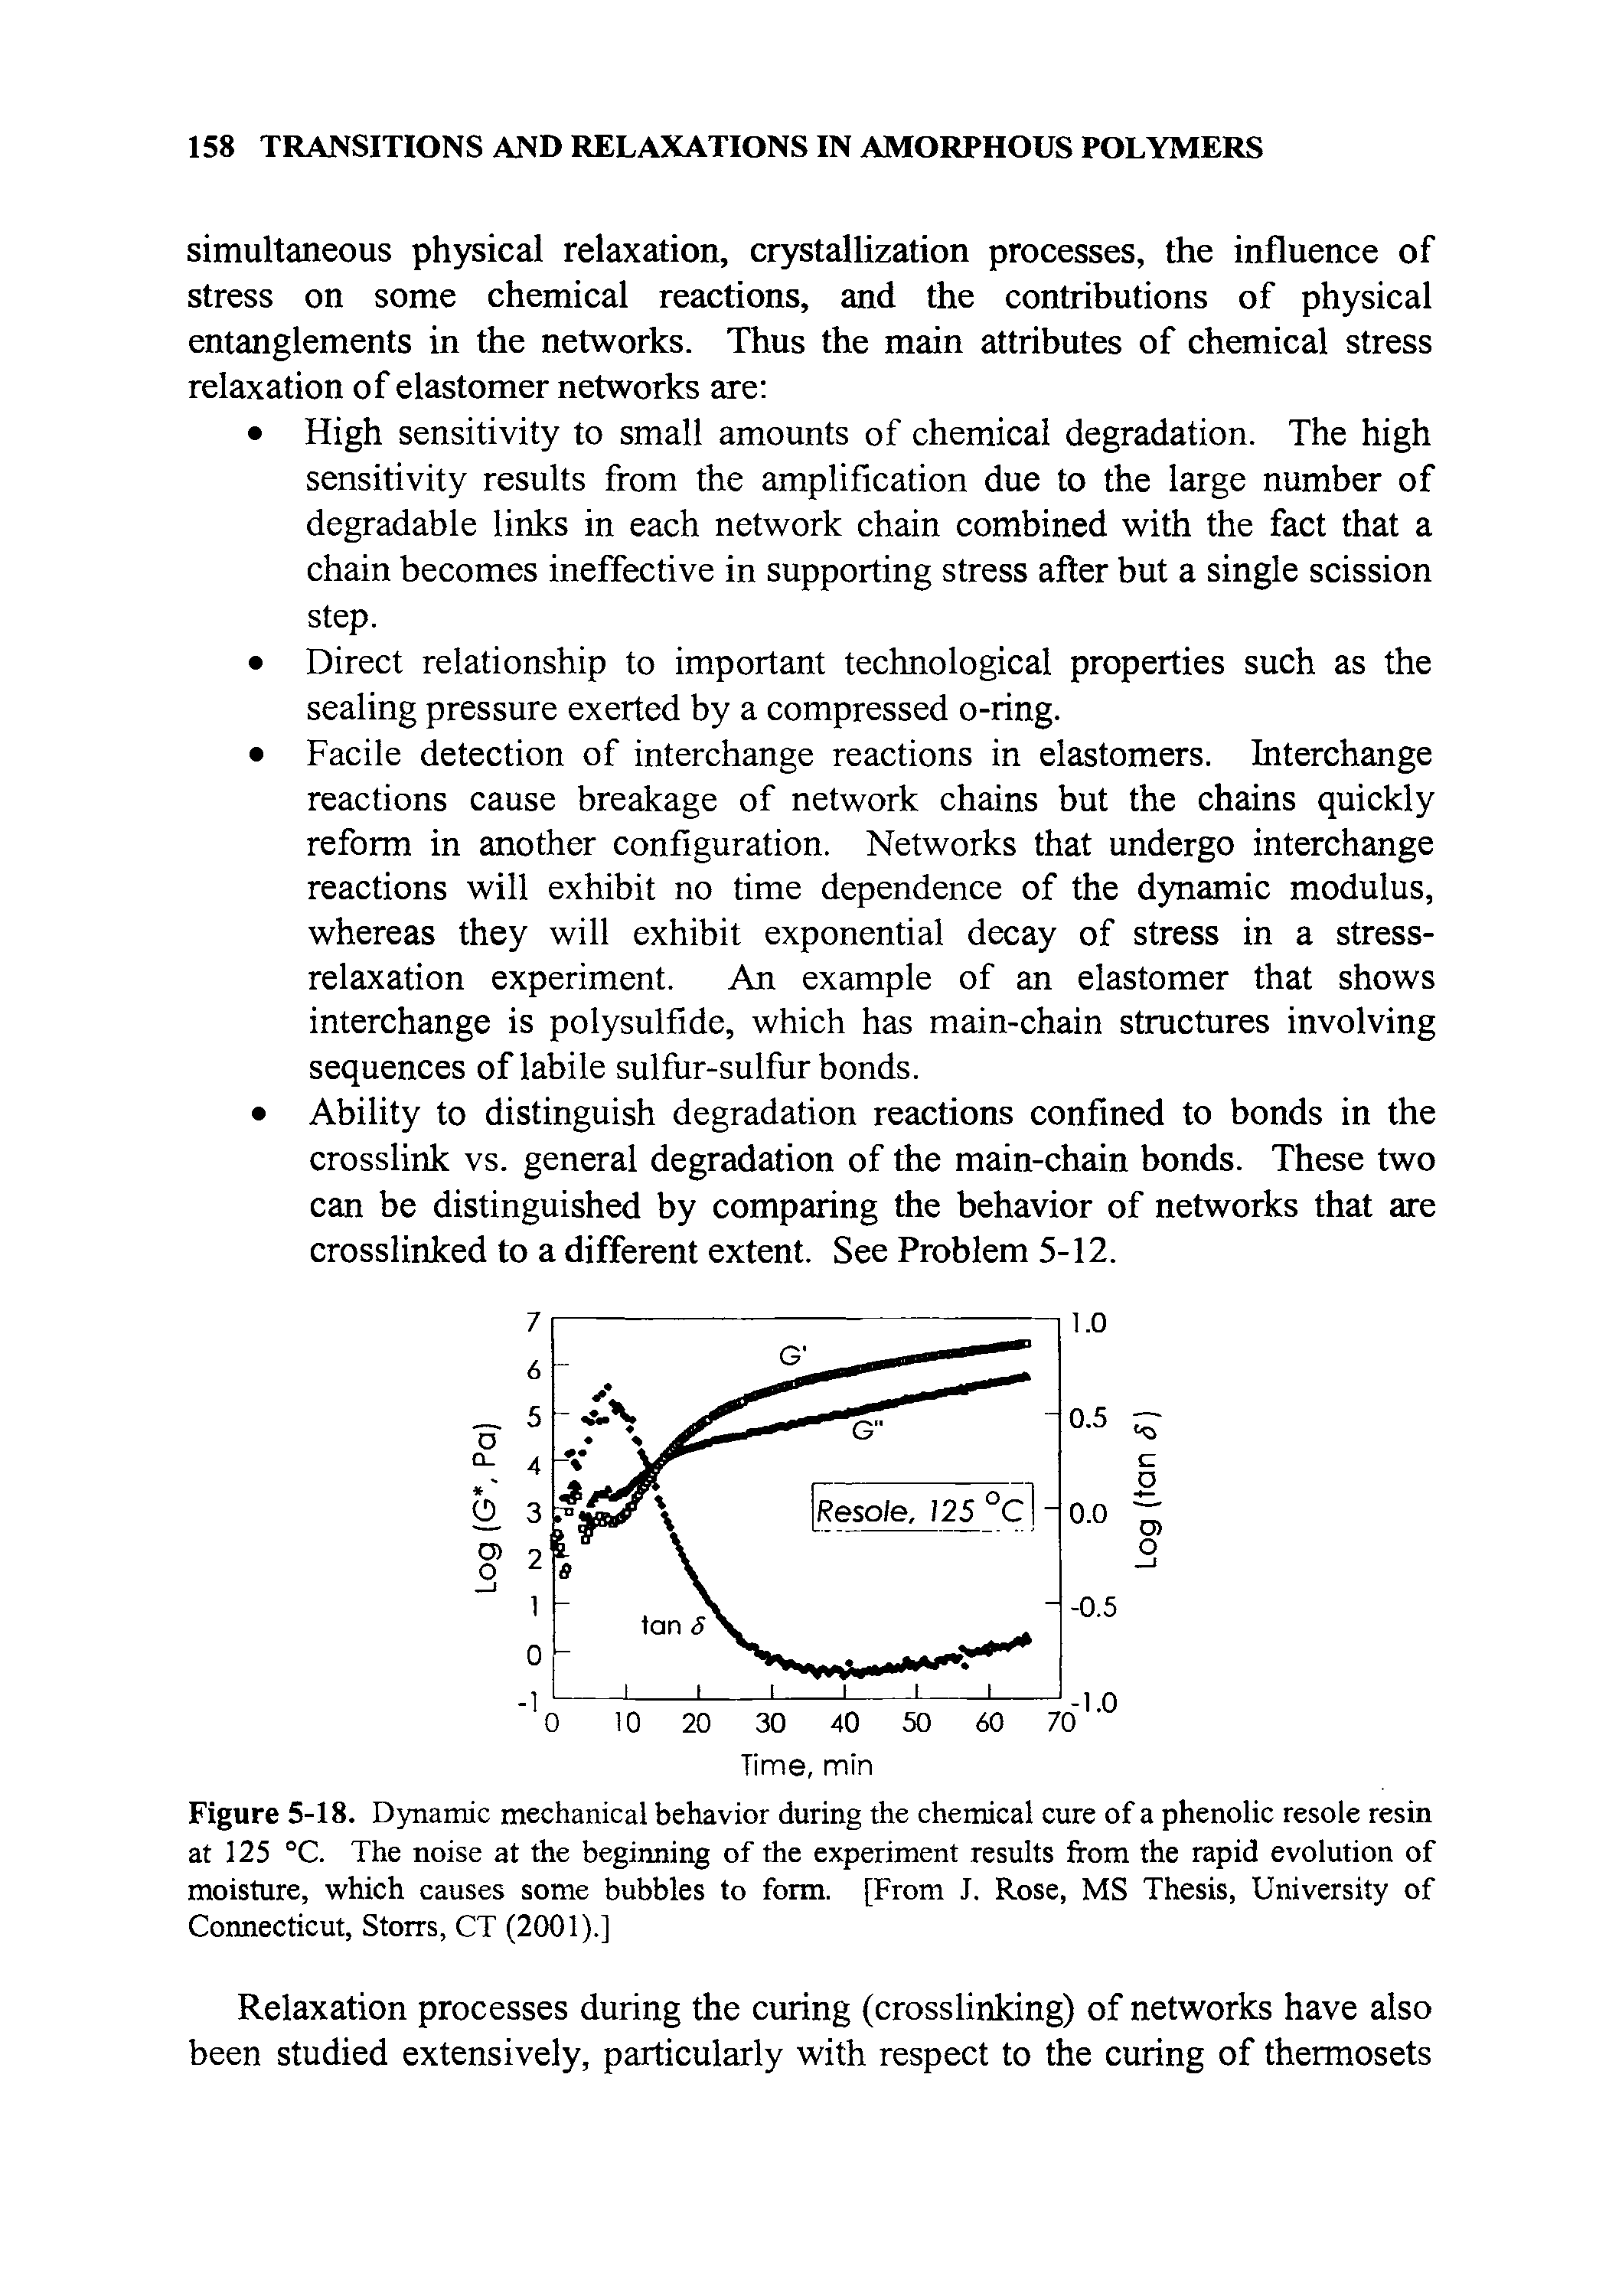 Figure 5-18. Dynamic mechanical behavior during the chemical cure of a phenolic resole resin at 125 °C. The noise at the beginning of the experiment results from the rapid evolution of moisture, which causes some bubbles to form. [From J. Rose, MS Thesis, University of Connecticut, Storrs, CT (2001).]...